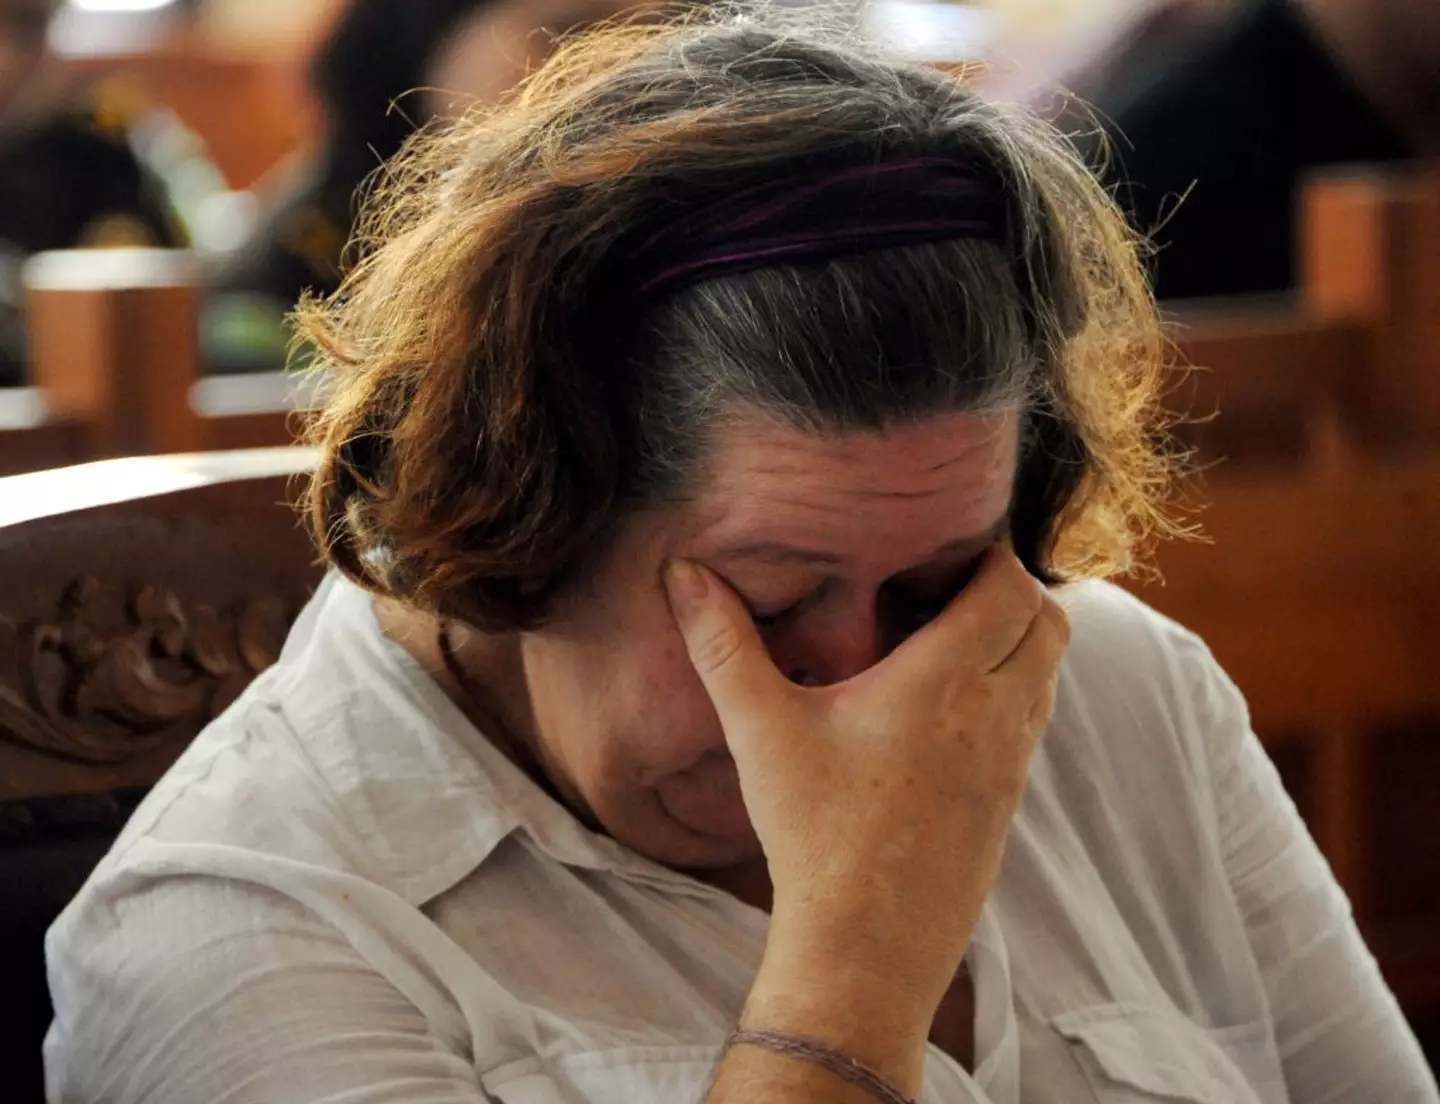 Sandiford claimed that she was smuggling it in to save her son after his life was threatened.